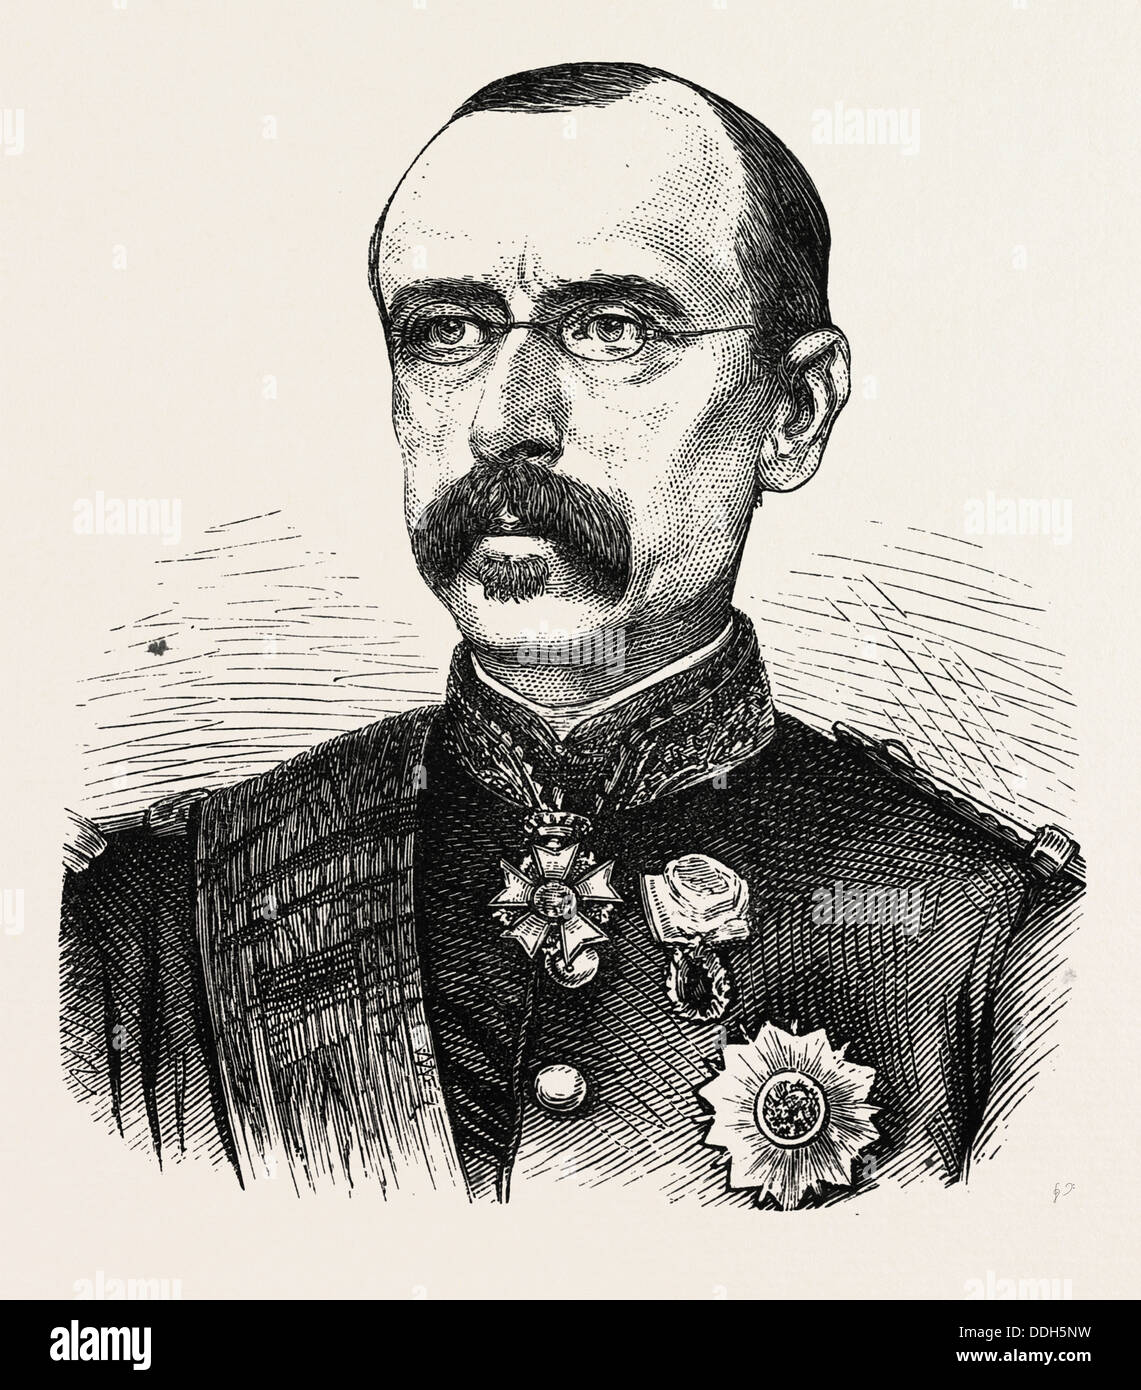 FRANCO-PRUSSIAN WAR: FAIDHERBE GENERAL, COMMANDER IN CHIEF OF THE NORTHERN FRENCH ARMY, ENGRAVING 1870 Stock Photo